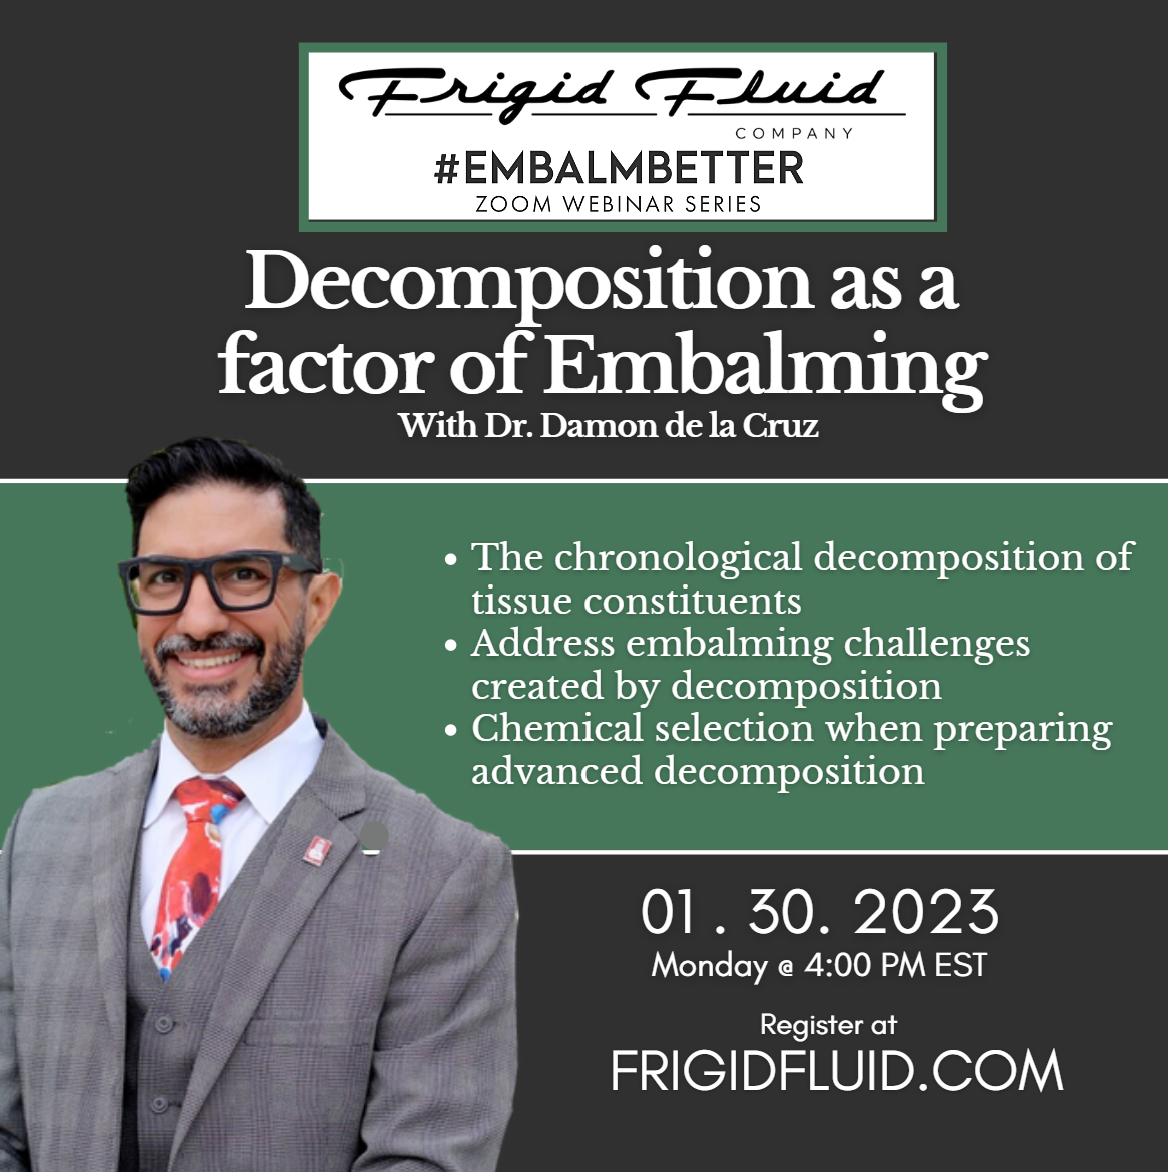 Decomposition as a factor of Embalming